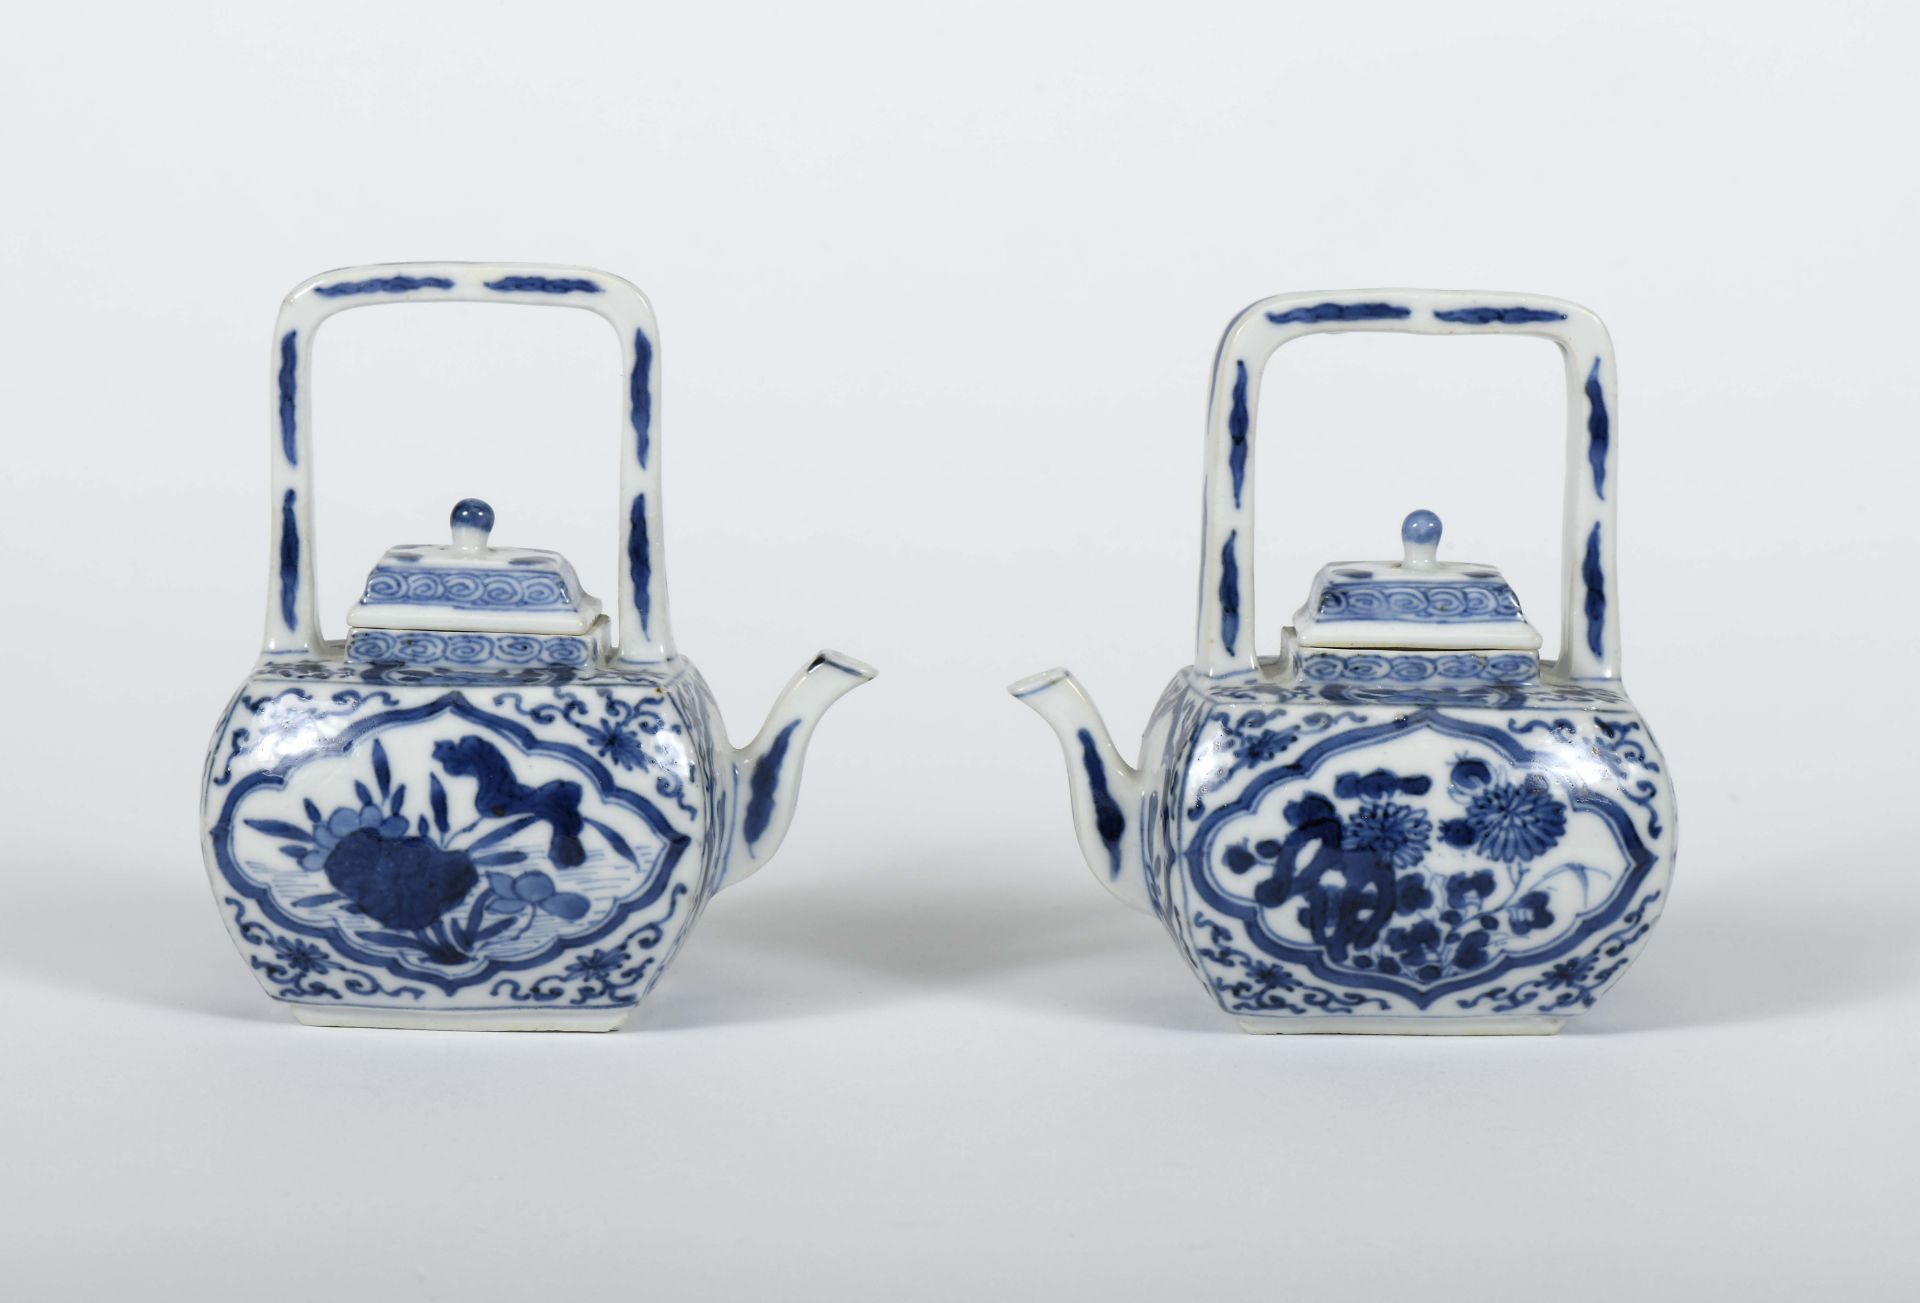 A pair of small teapots with covers